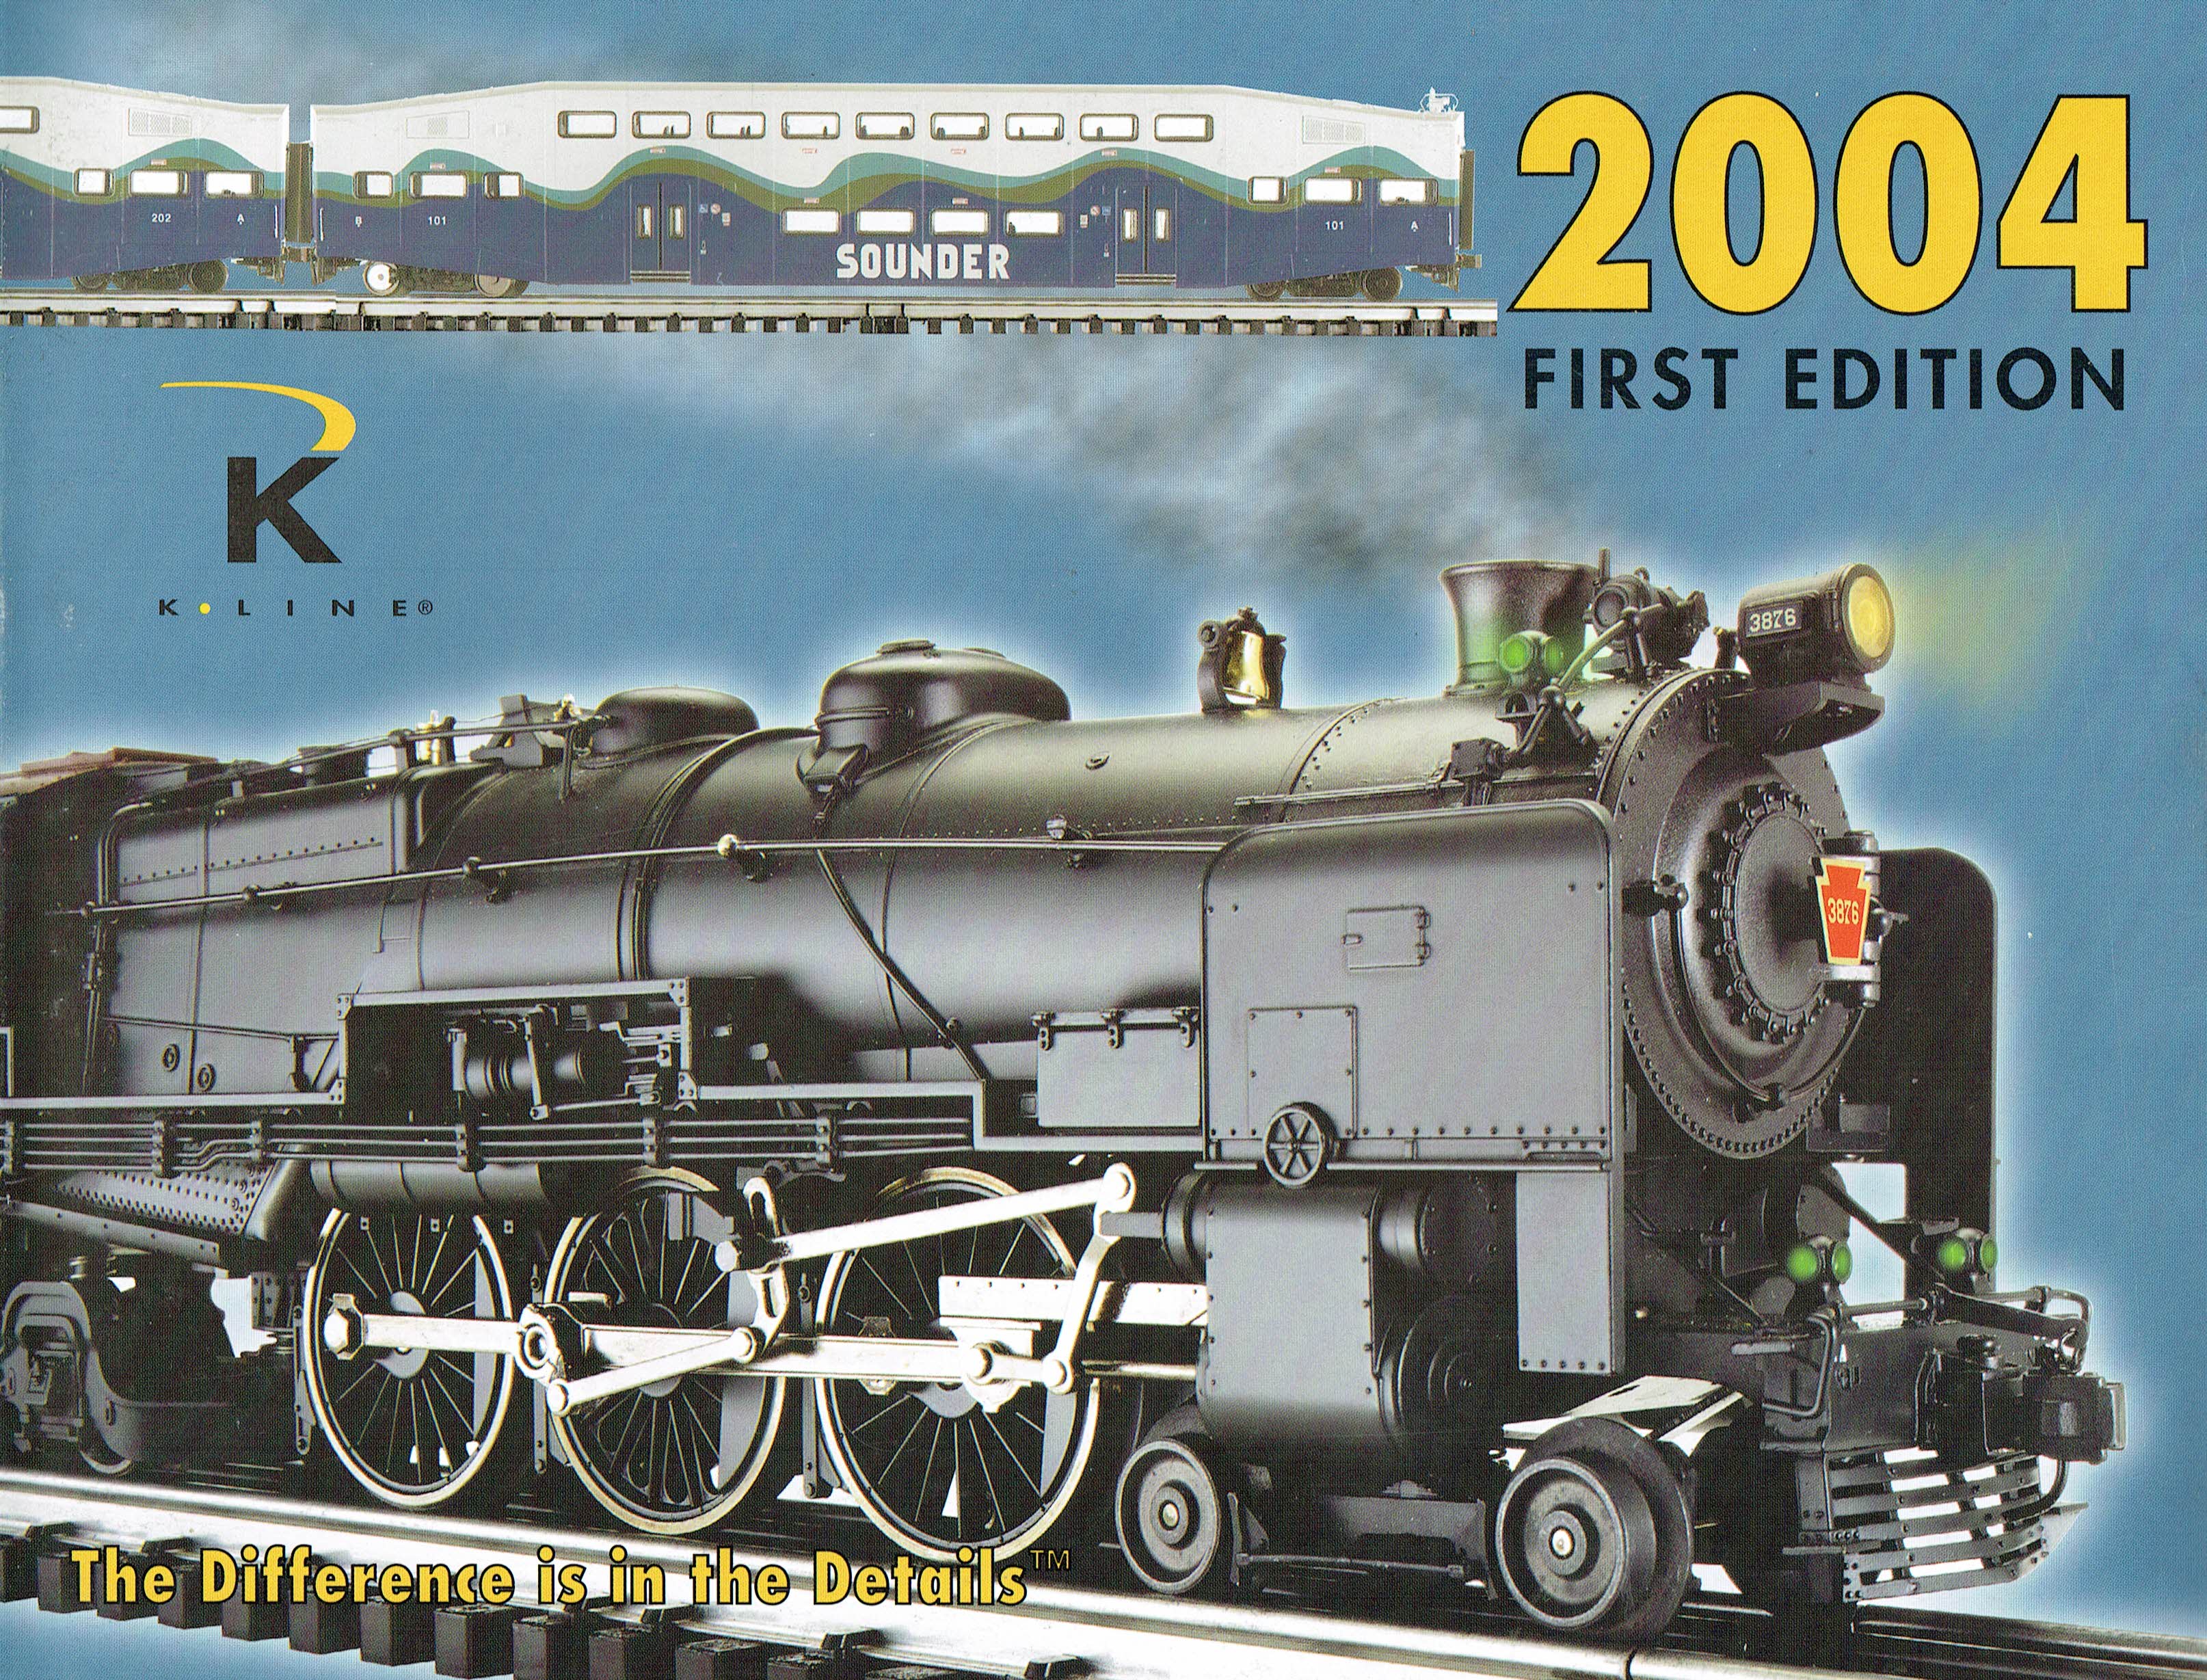 K-Line 2004 First Edition Catalog image